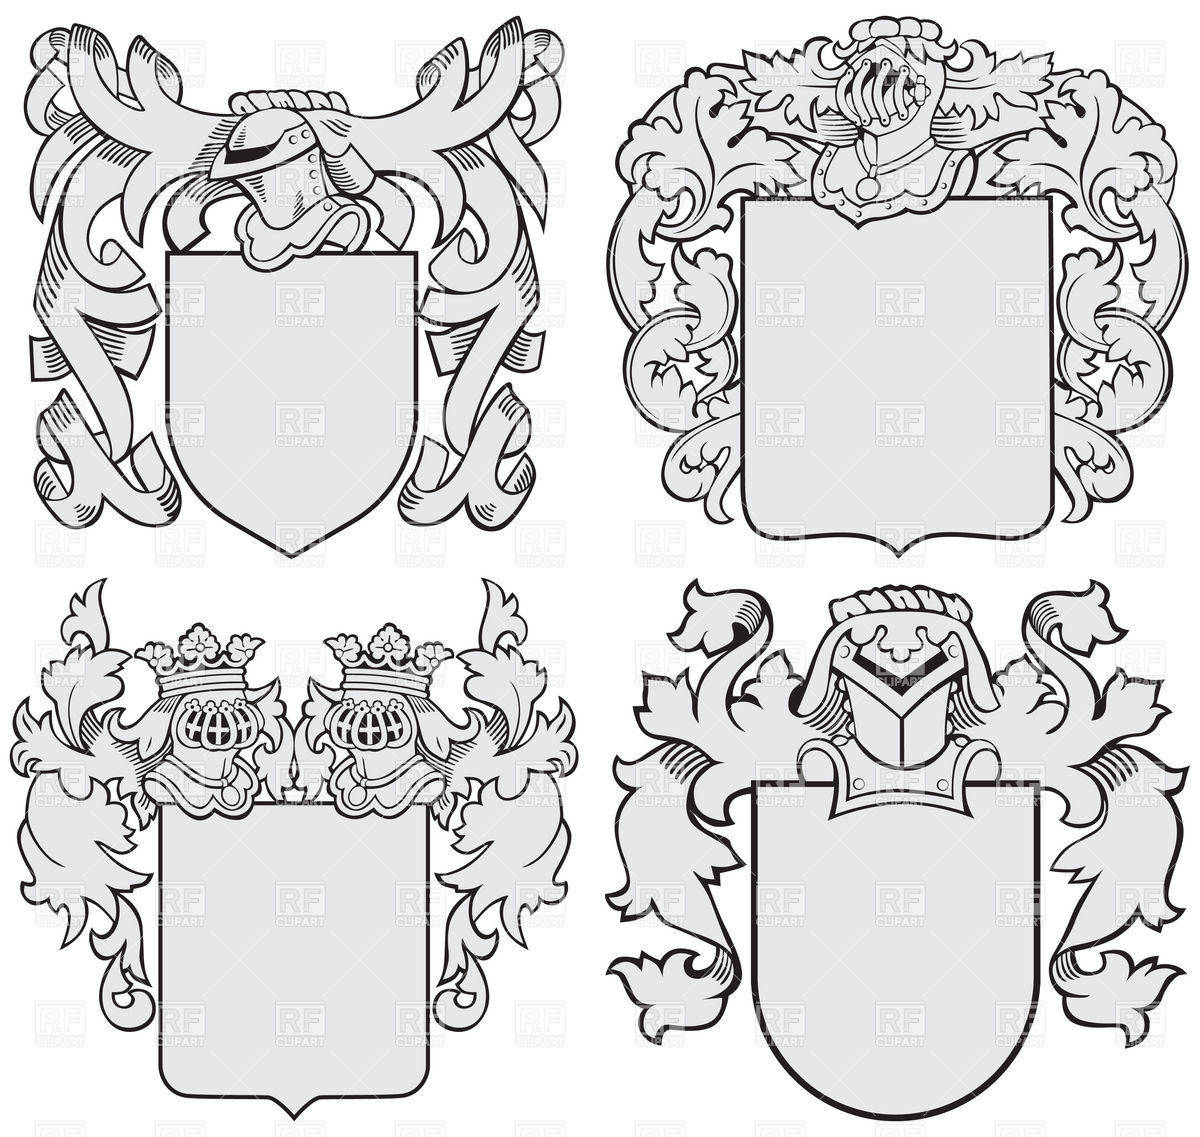 Coat Of Arms Template Vector at GetDrawings Free download